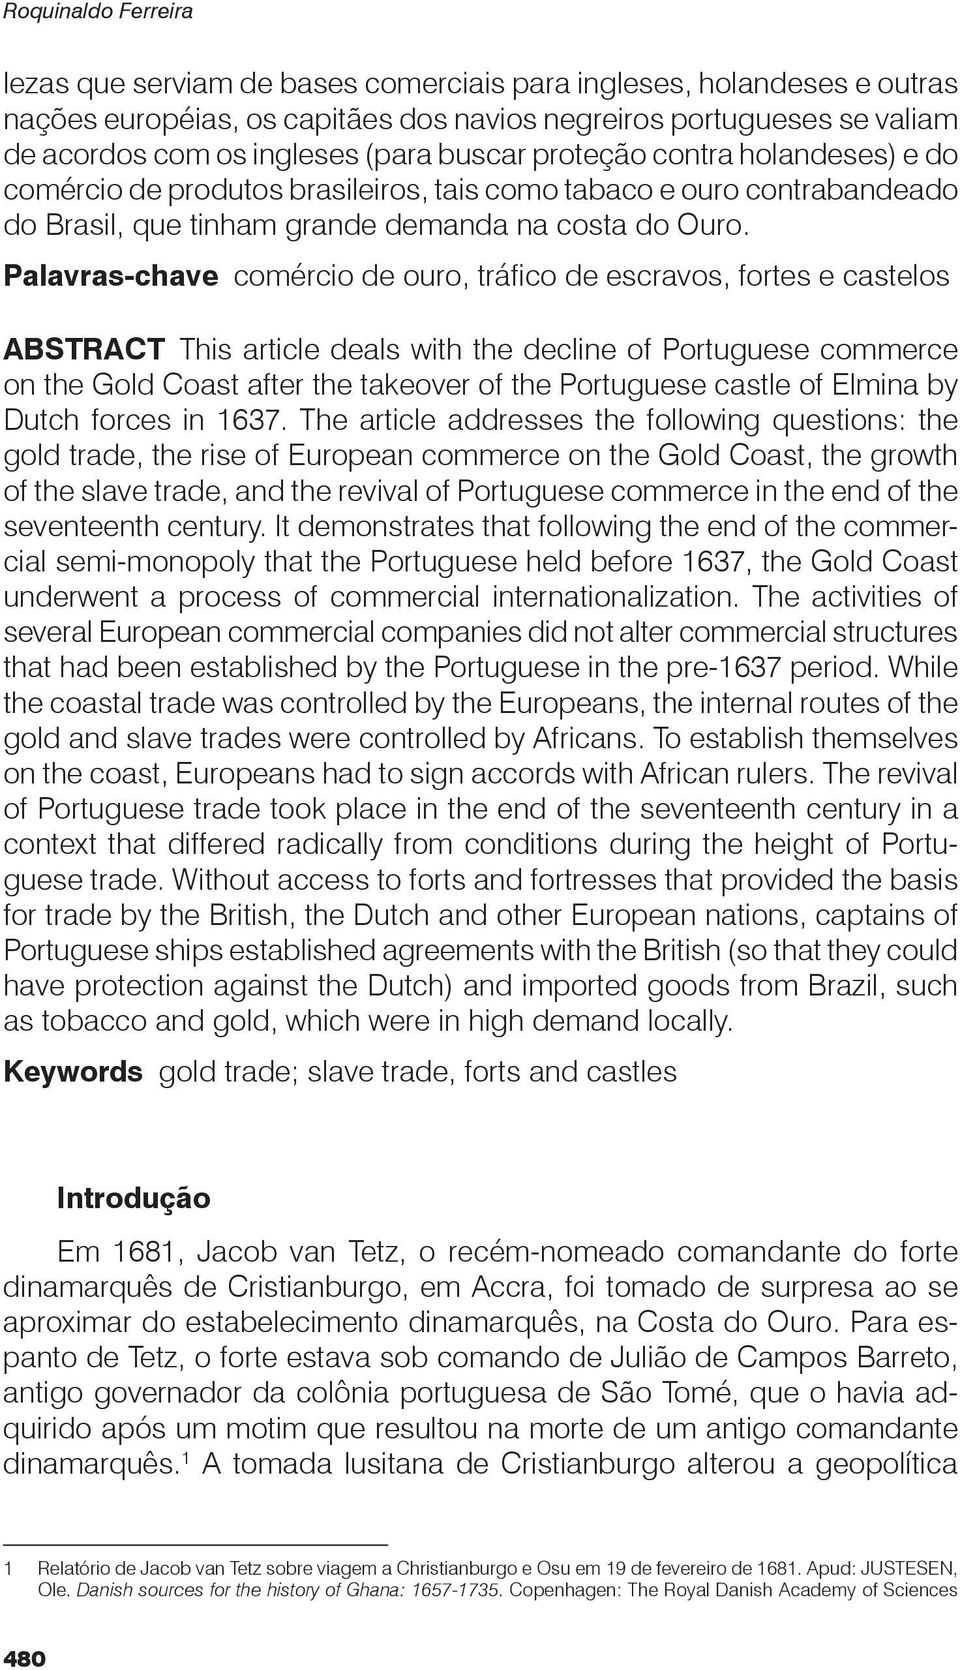 Palavras-chave comércio de ouro, tráfico de escravos, fortes e castelos ABSTRACT This article deals with the decline of Portuguese commerce on the Gold Coast after the takeover of the Portuguese